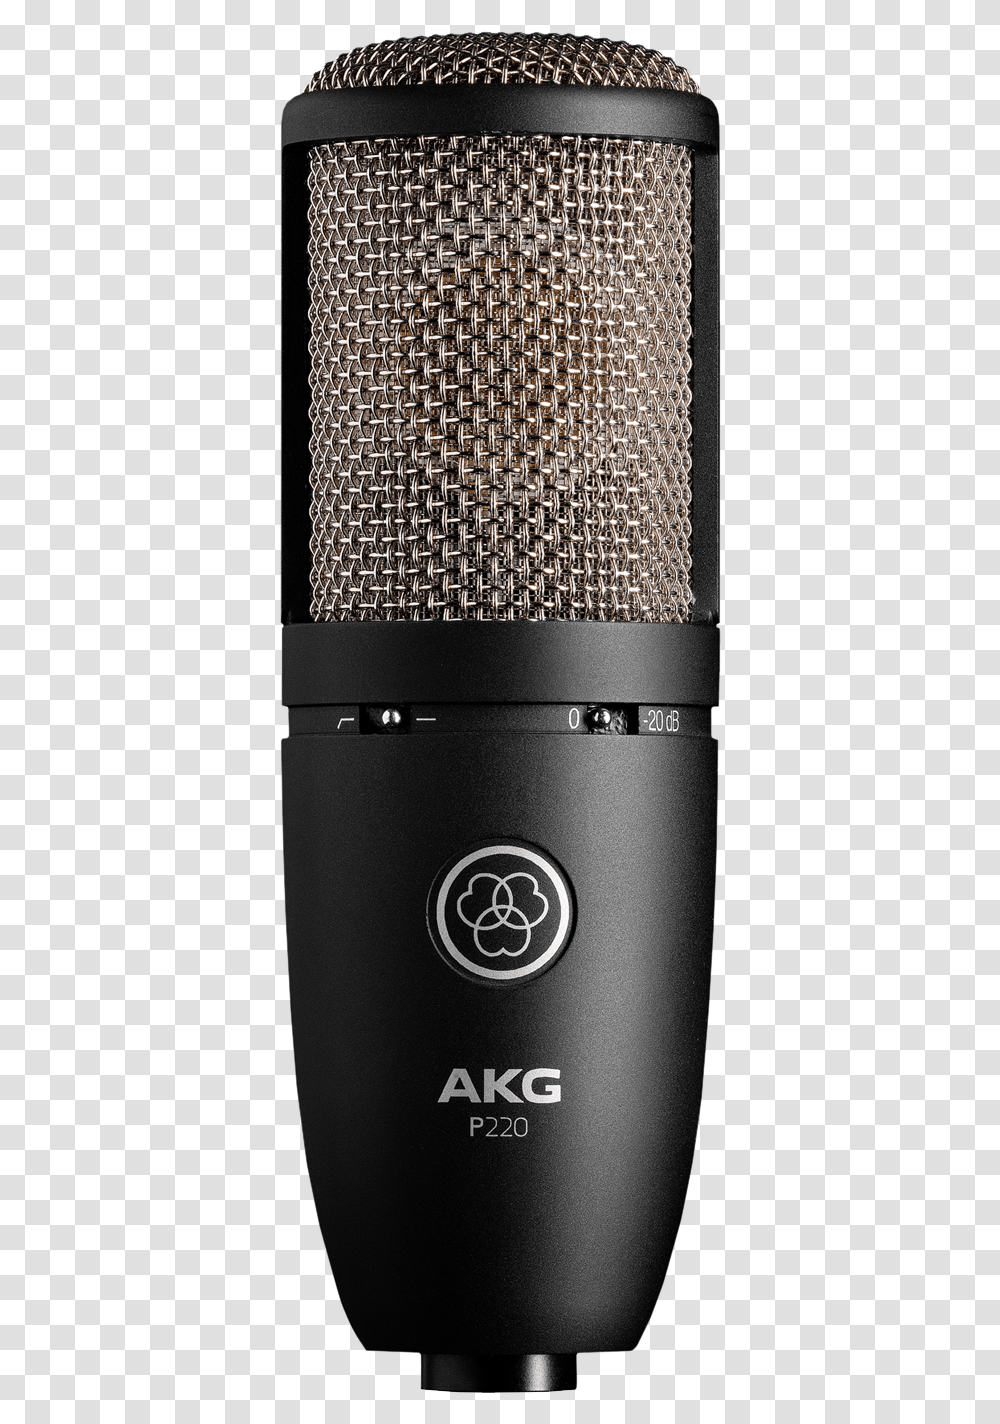 P220 Akg, Electrical Device, Microphone, Lamp Transparent Png